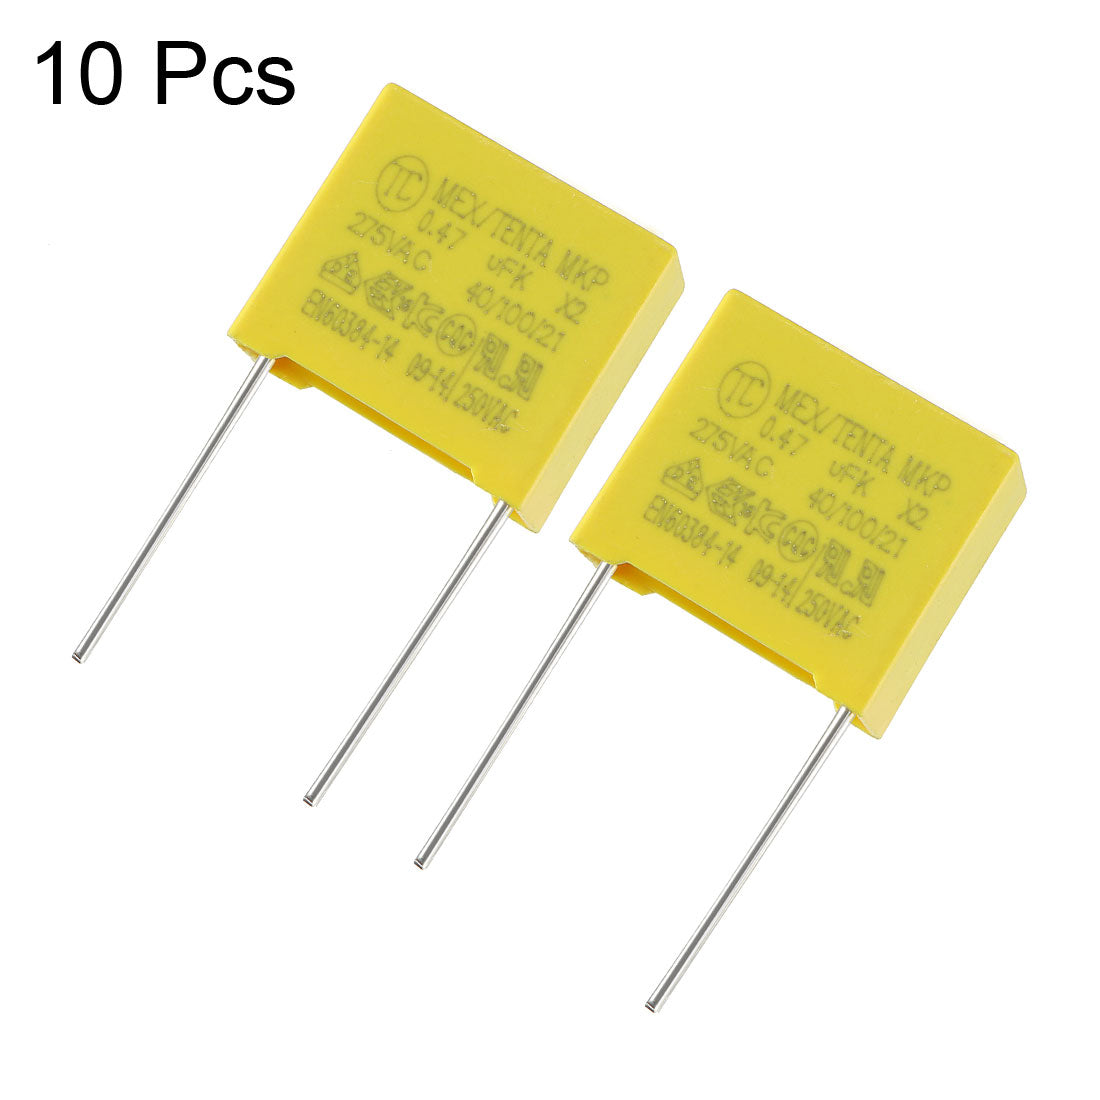 uxcell Uxcell Safety Capacitors Polypropylene Film 0.47uF 275VAC X2 MKP 10 Pcs